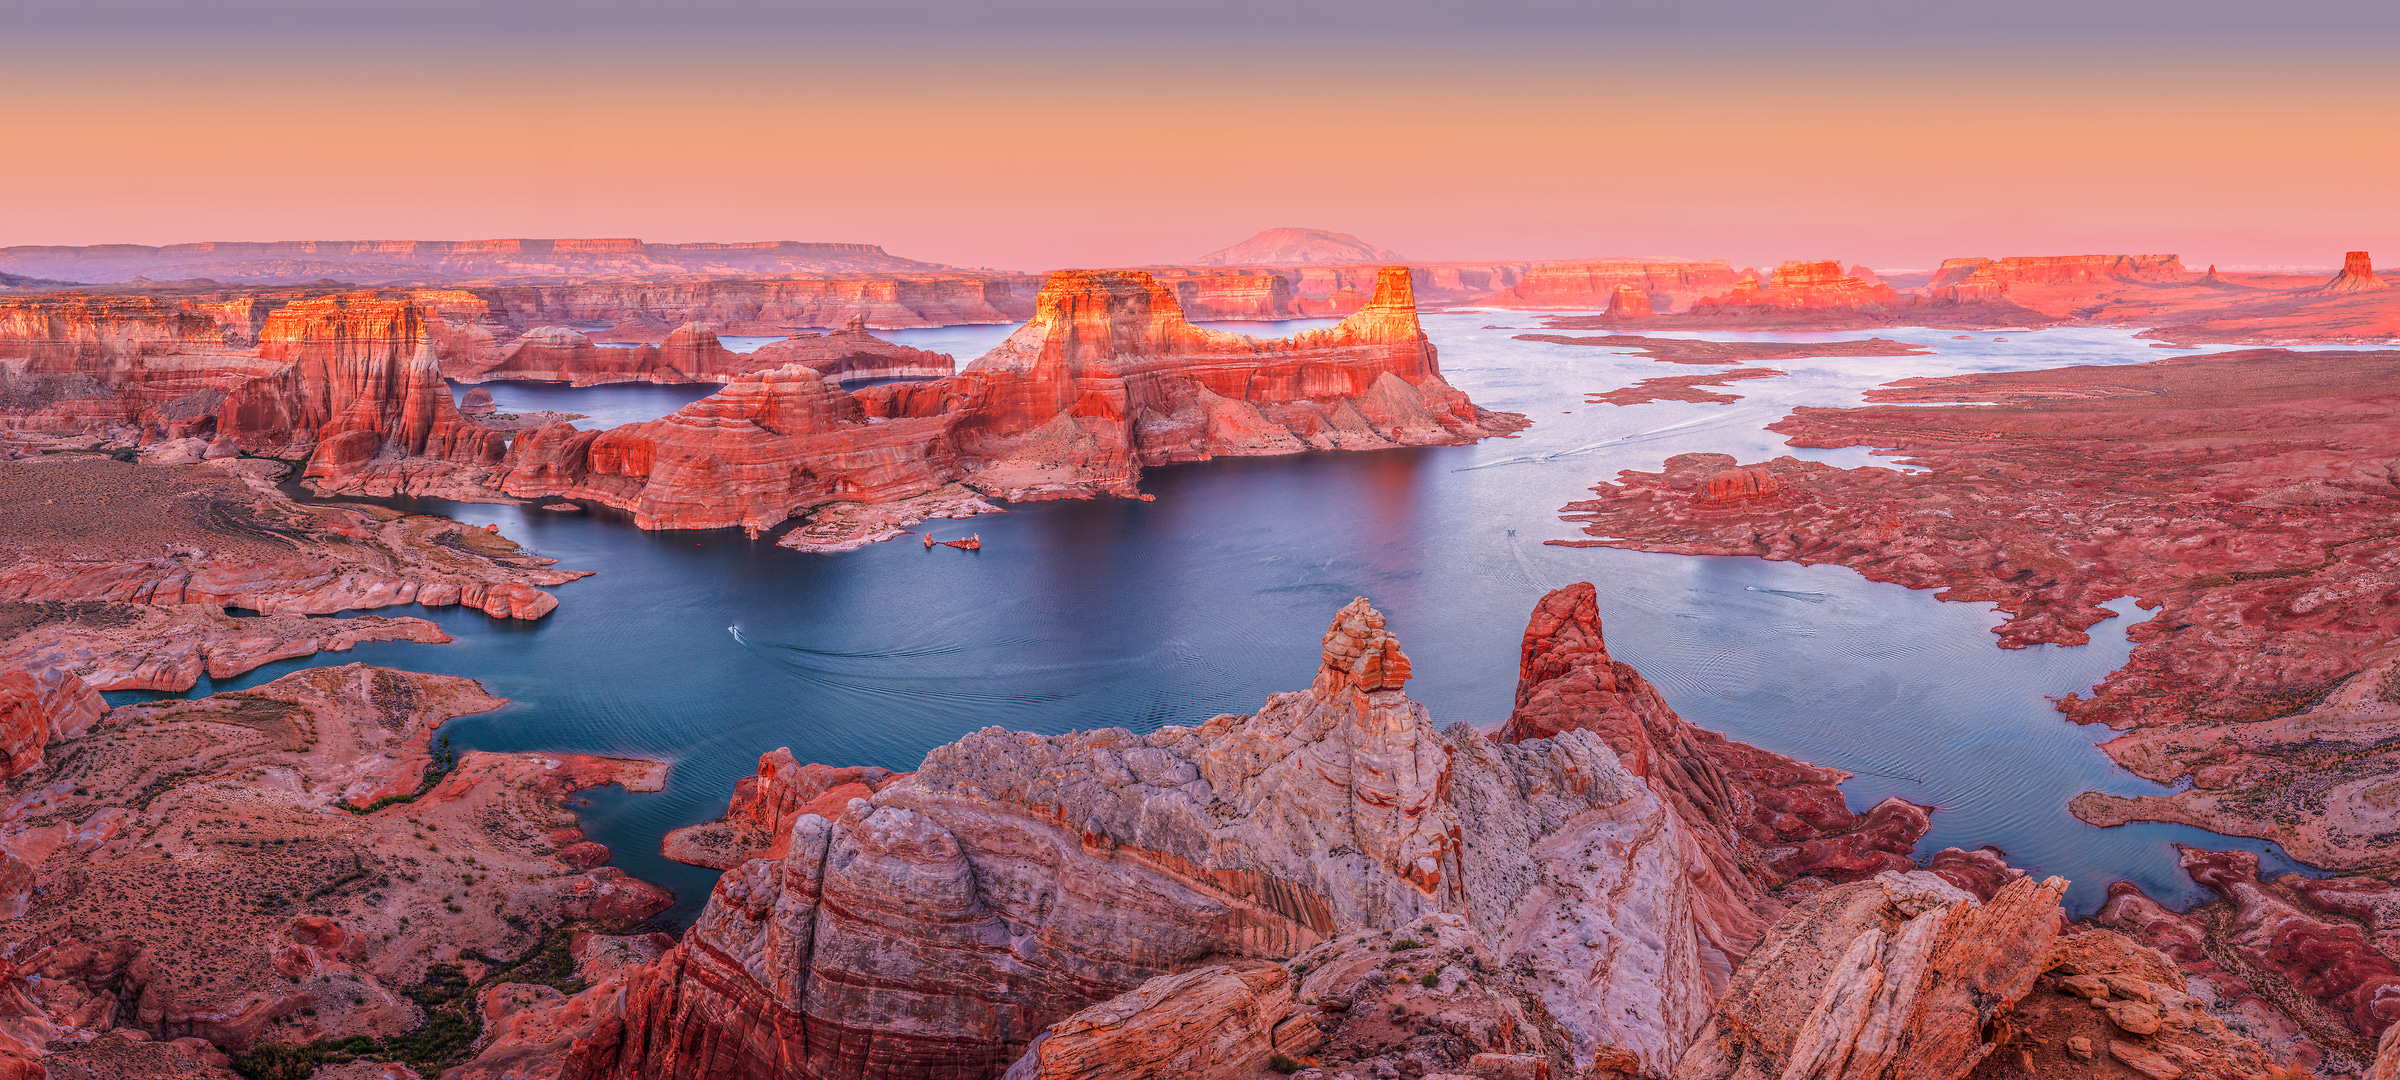 681 megapixels! A very high resolution, large-format VAST photo print of Lake Powell; fine art landscape photo created by Chris Collacott in Glen Canyon National Recreational Area, Utah.